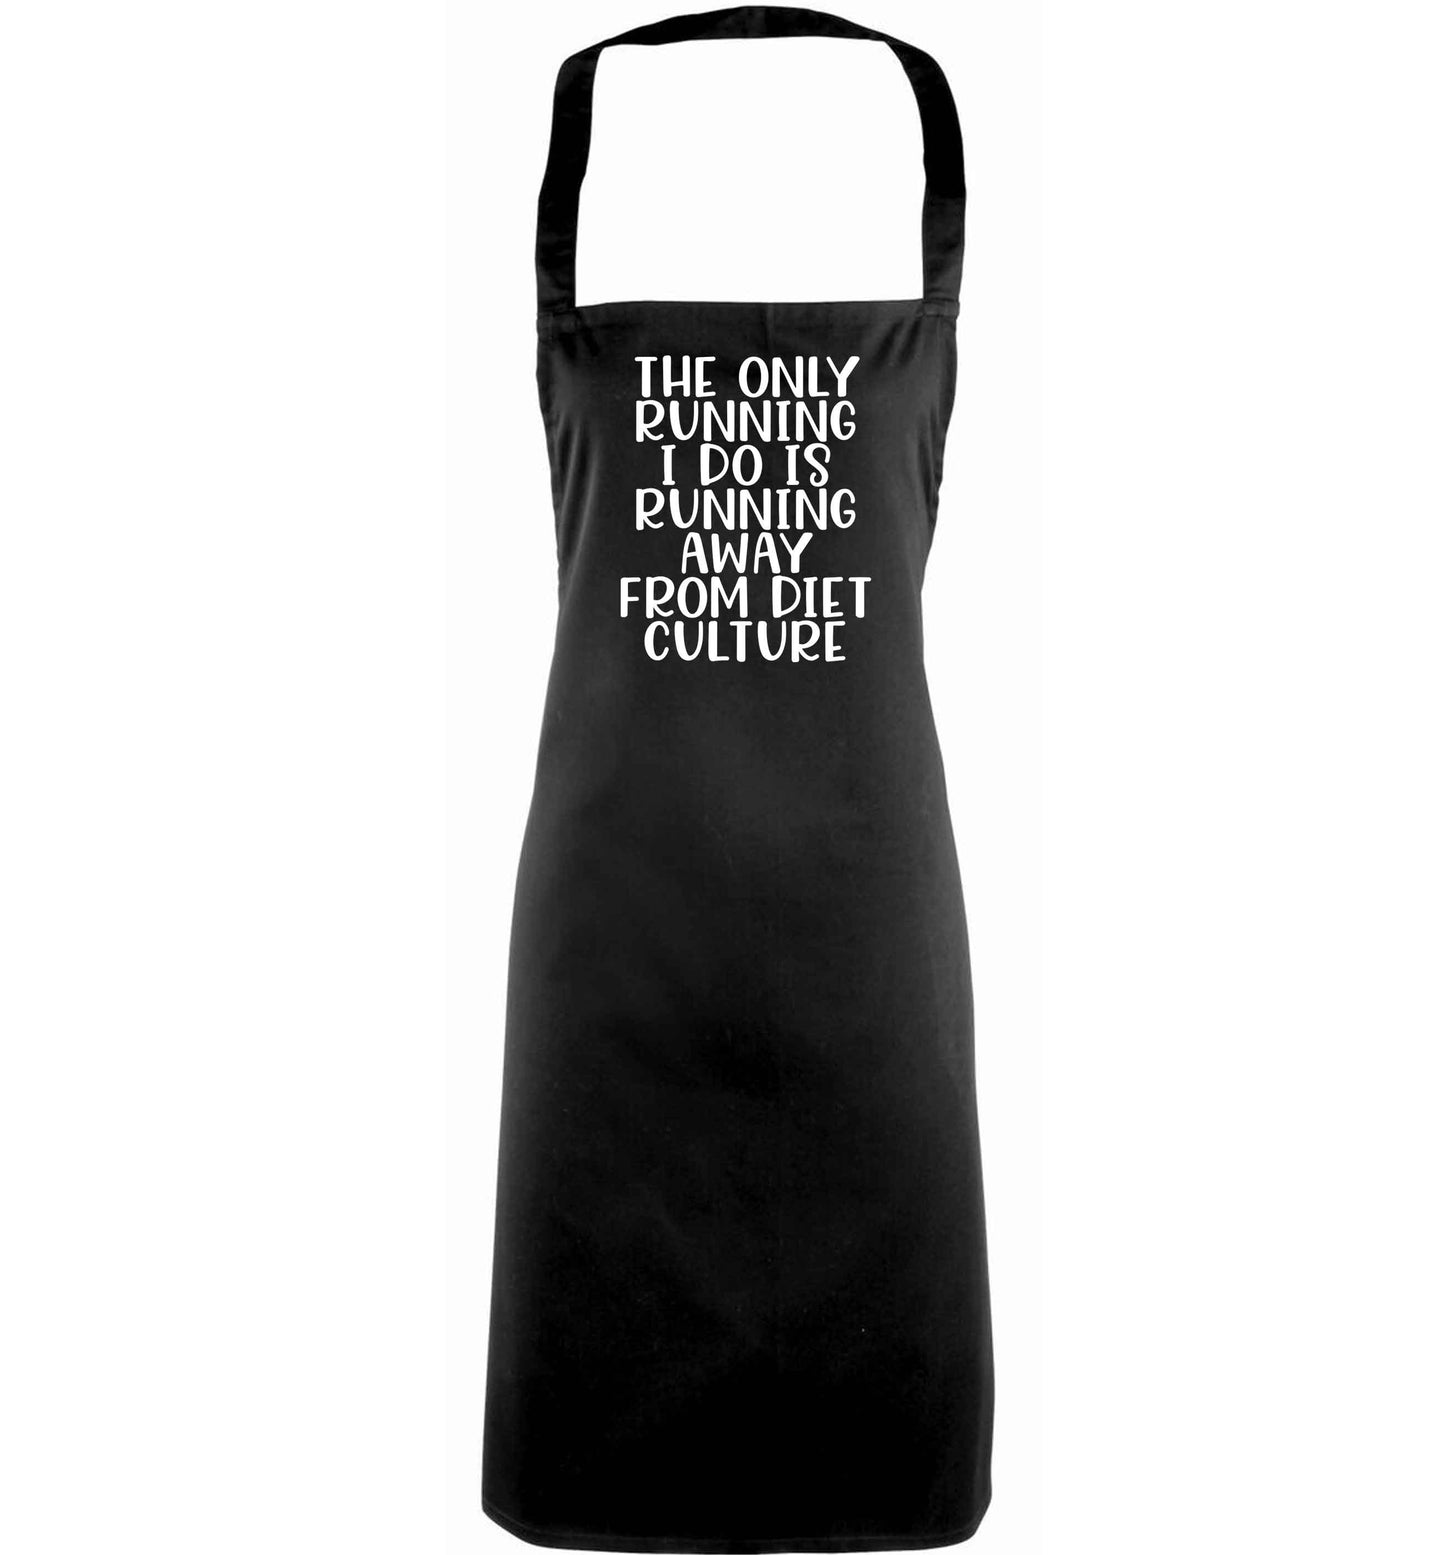 The only running I do is running away from diet culture adults black apron